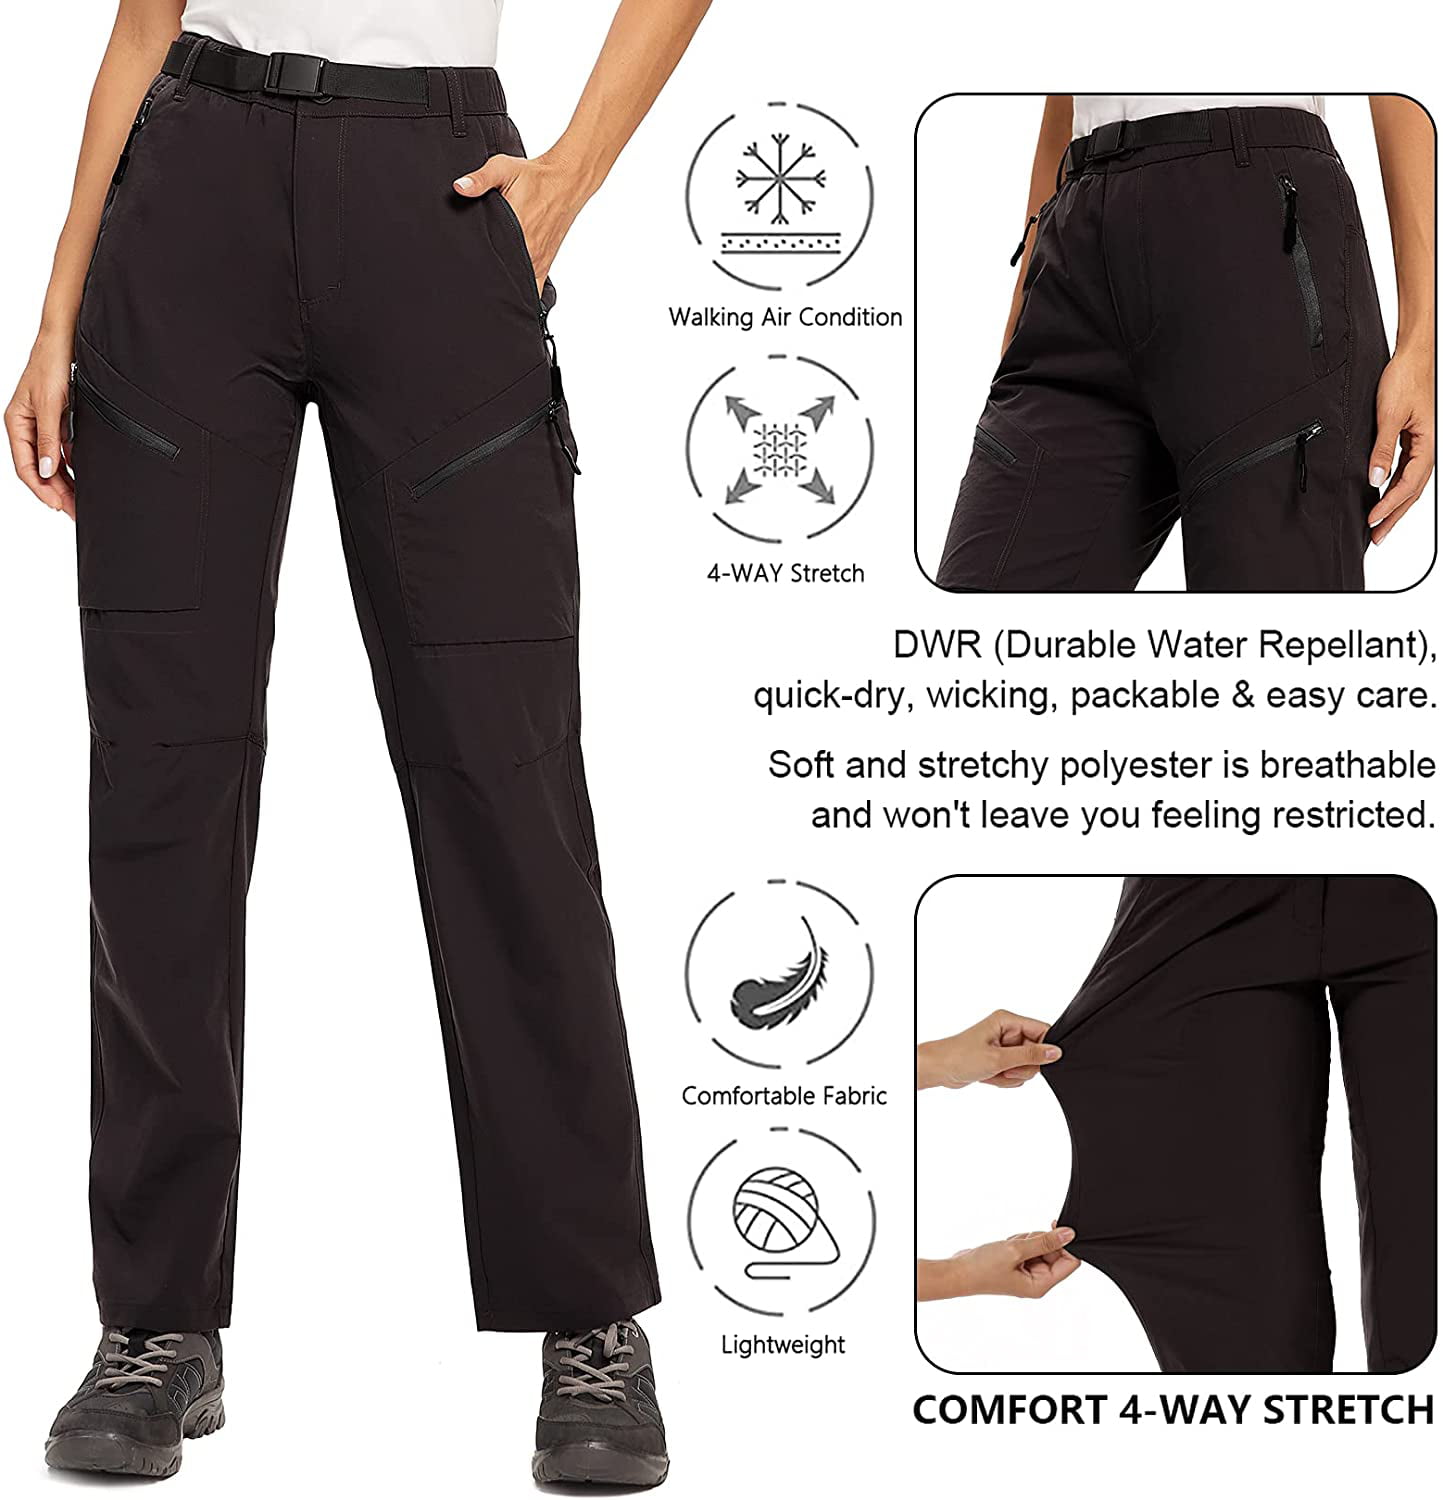 RlaGed Women's Hiking Cargo Pants Quick Dry Stretch Lightweight Outdoor Water Resistant UPF 50 Fishing Camping Capri Pants 